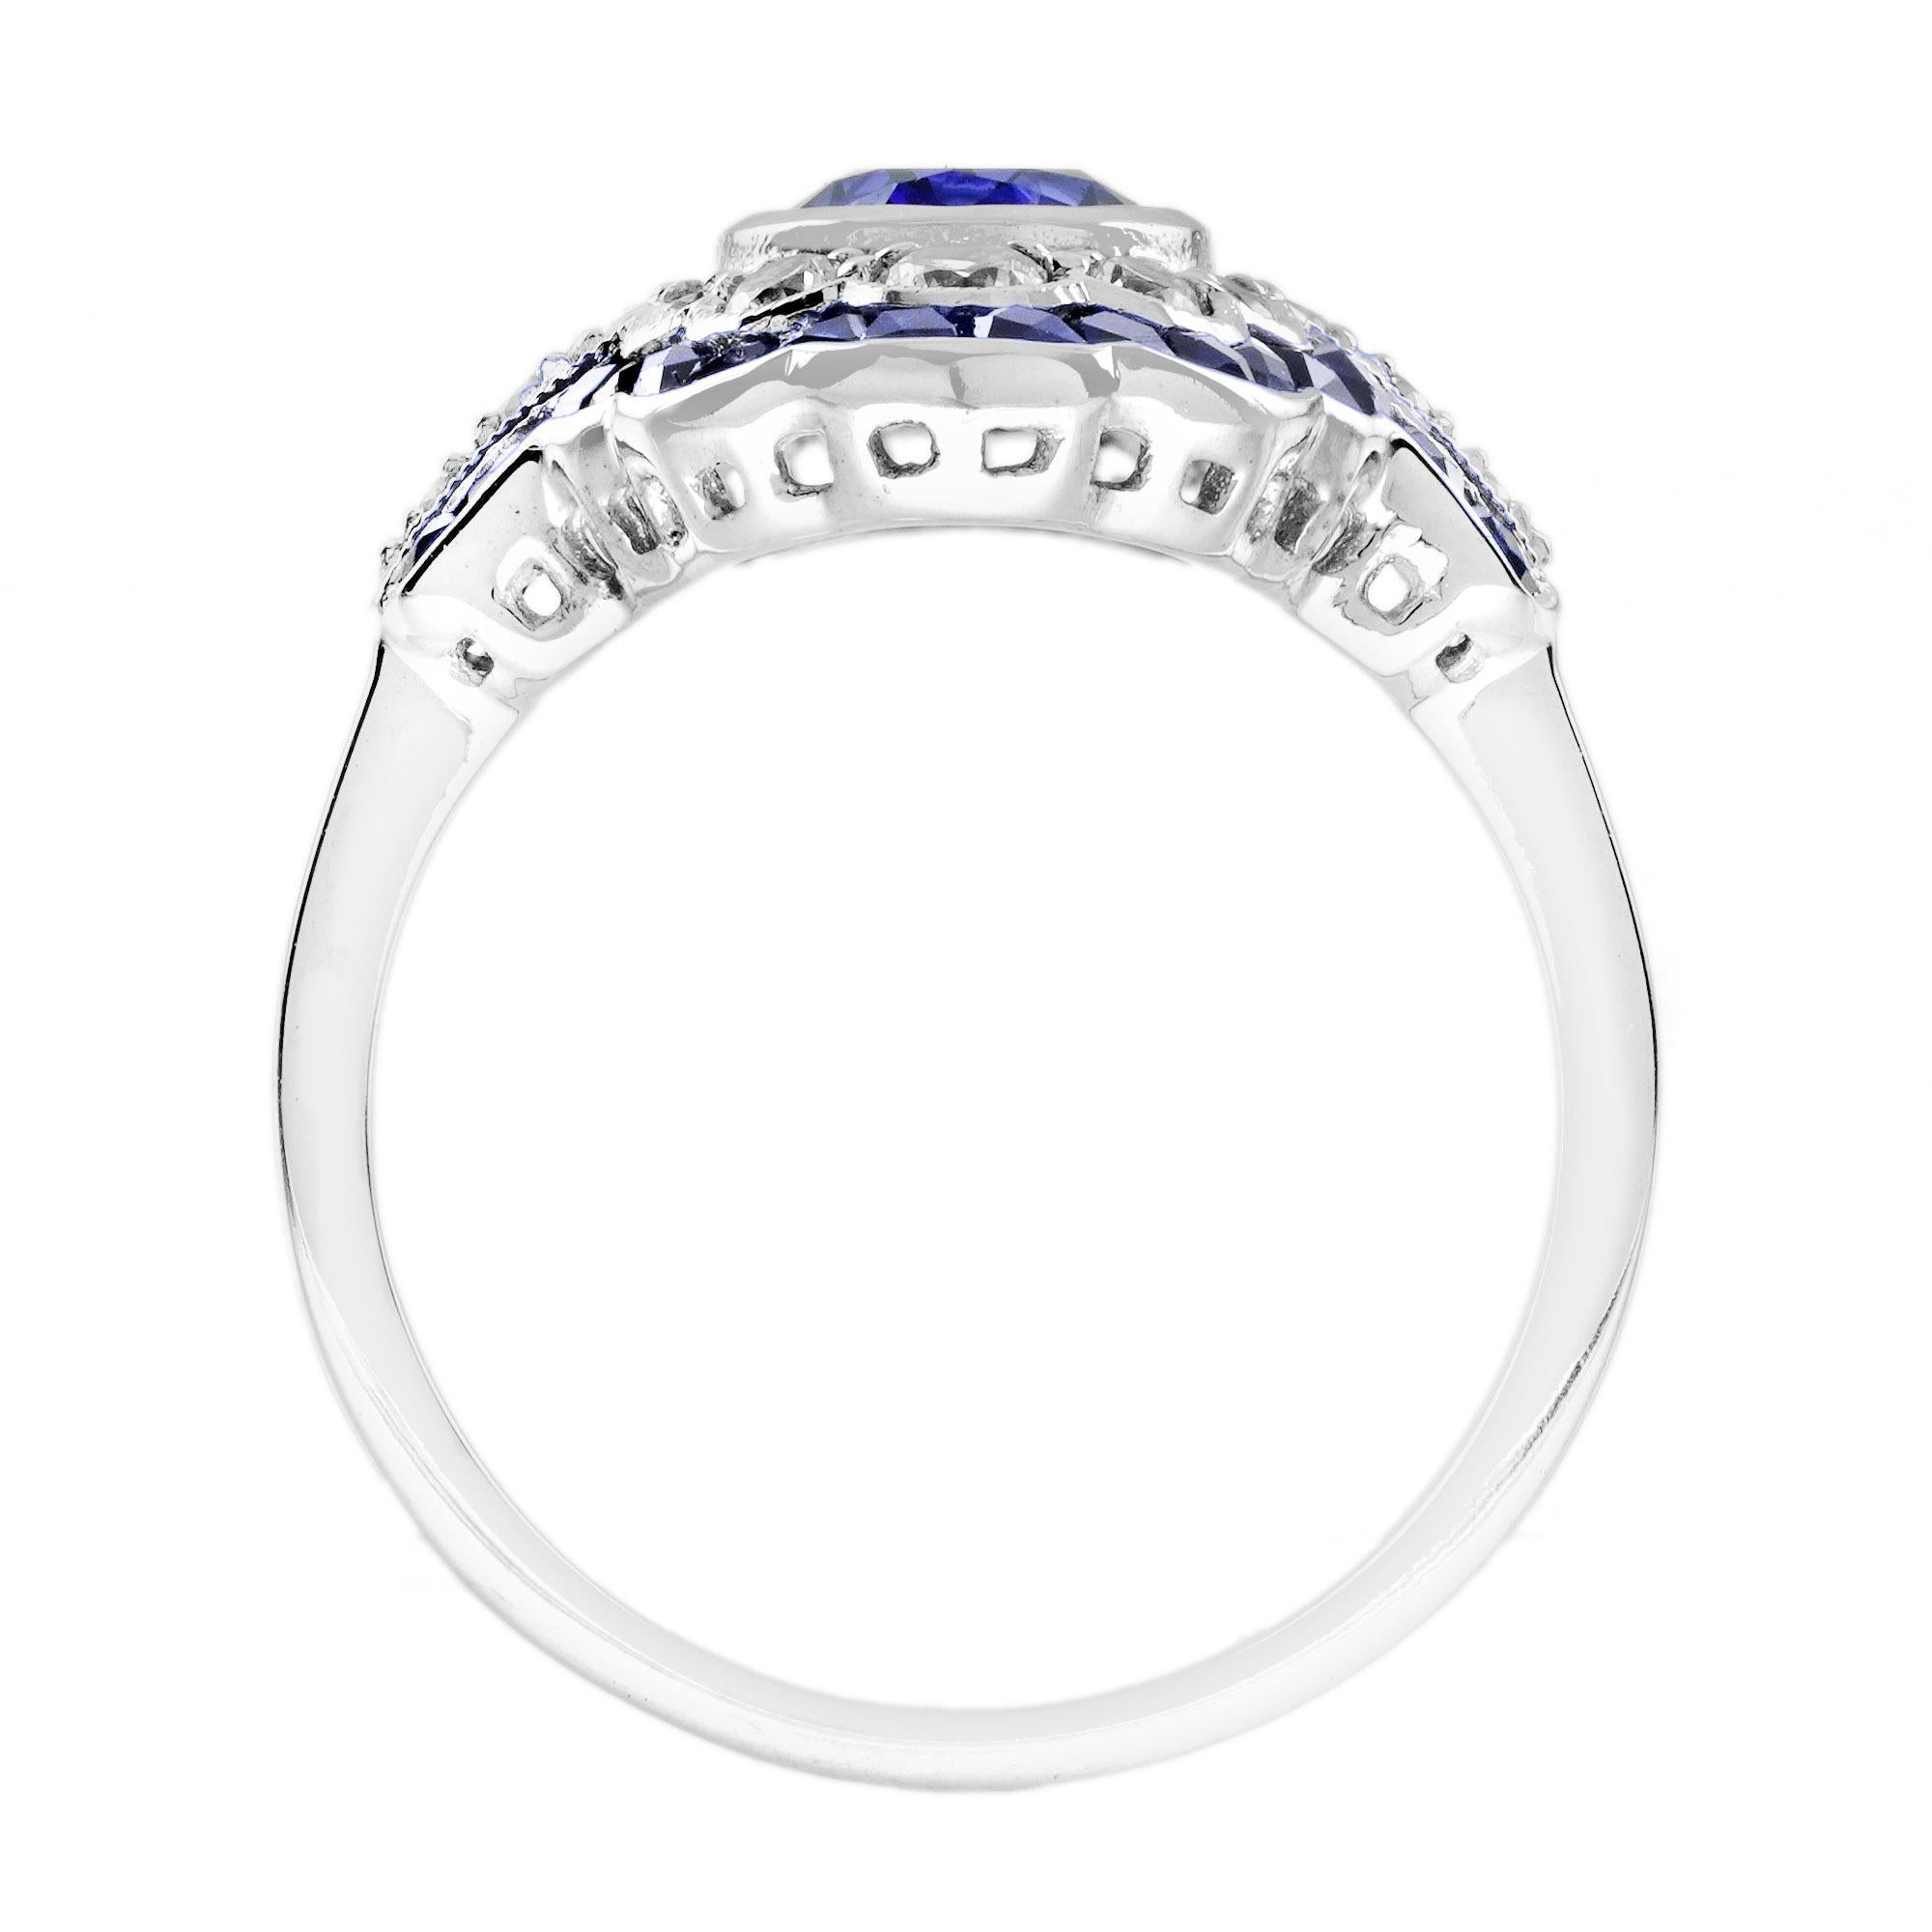 1.6 Ct. Ceylon Sapphire Diamond Art Deco Style Engagement Ring in 18K White Gold For Sale 1